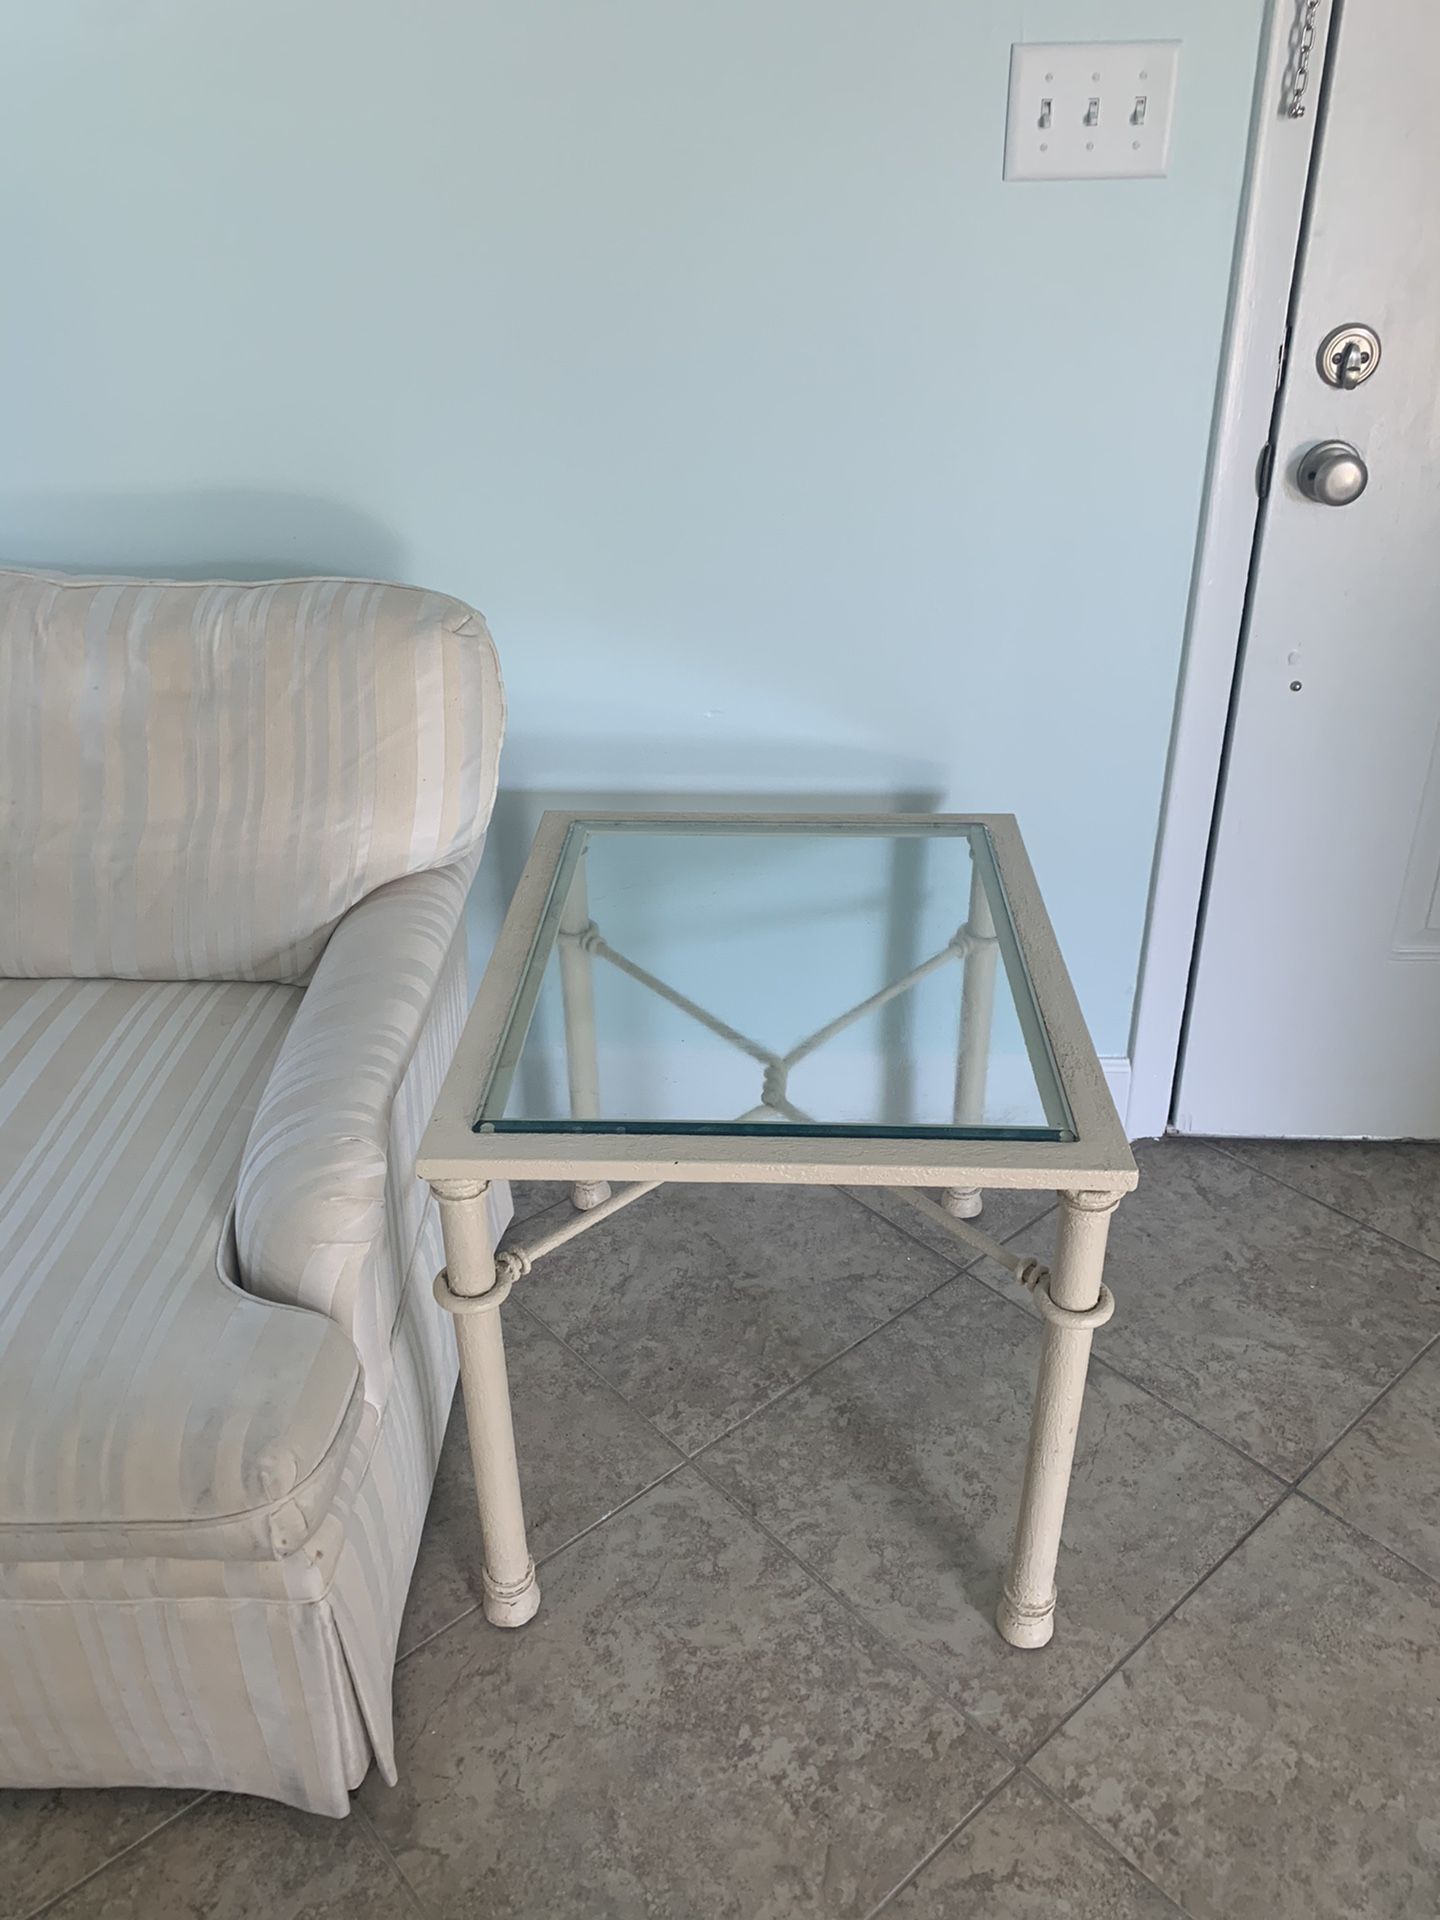 2 beach end tables and coffee table